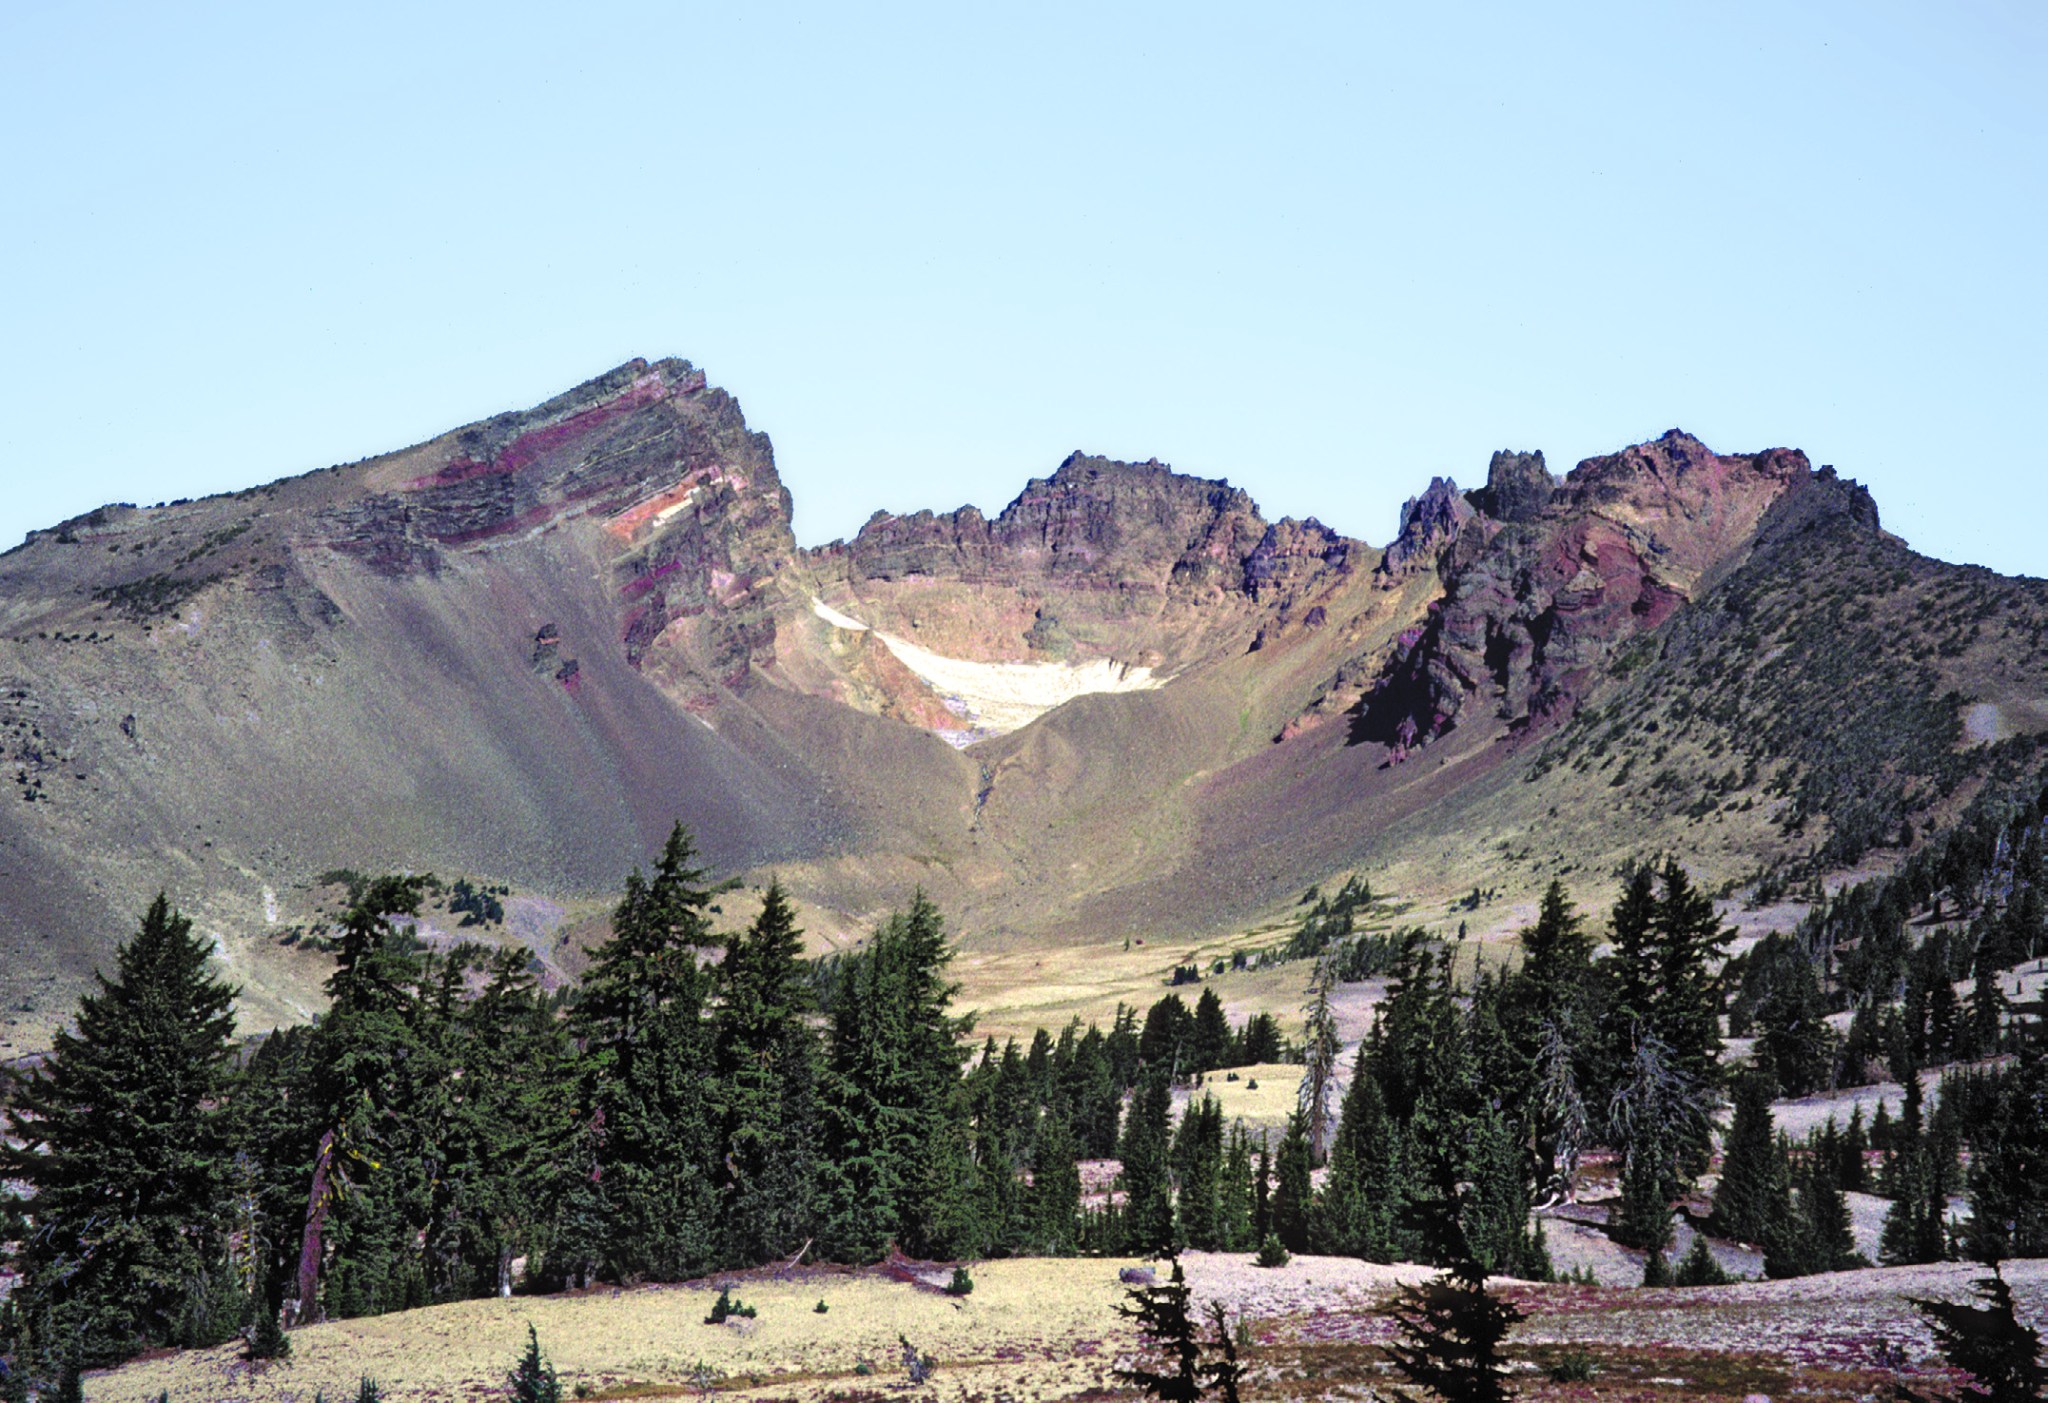 Three Sisters Volcano in Central Oregon. The mountain is a dark rainbow of colors, with purples and browns fading into pinks and greens. In the caldera, white peeks out. A line of pine trees stands in the foreground. 